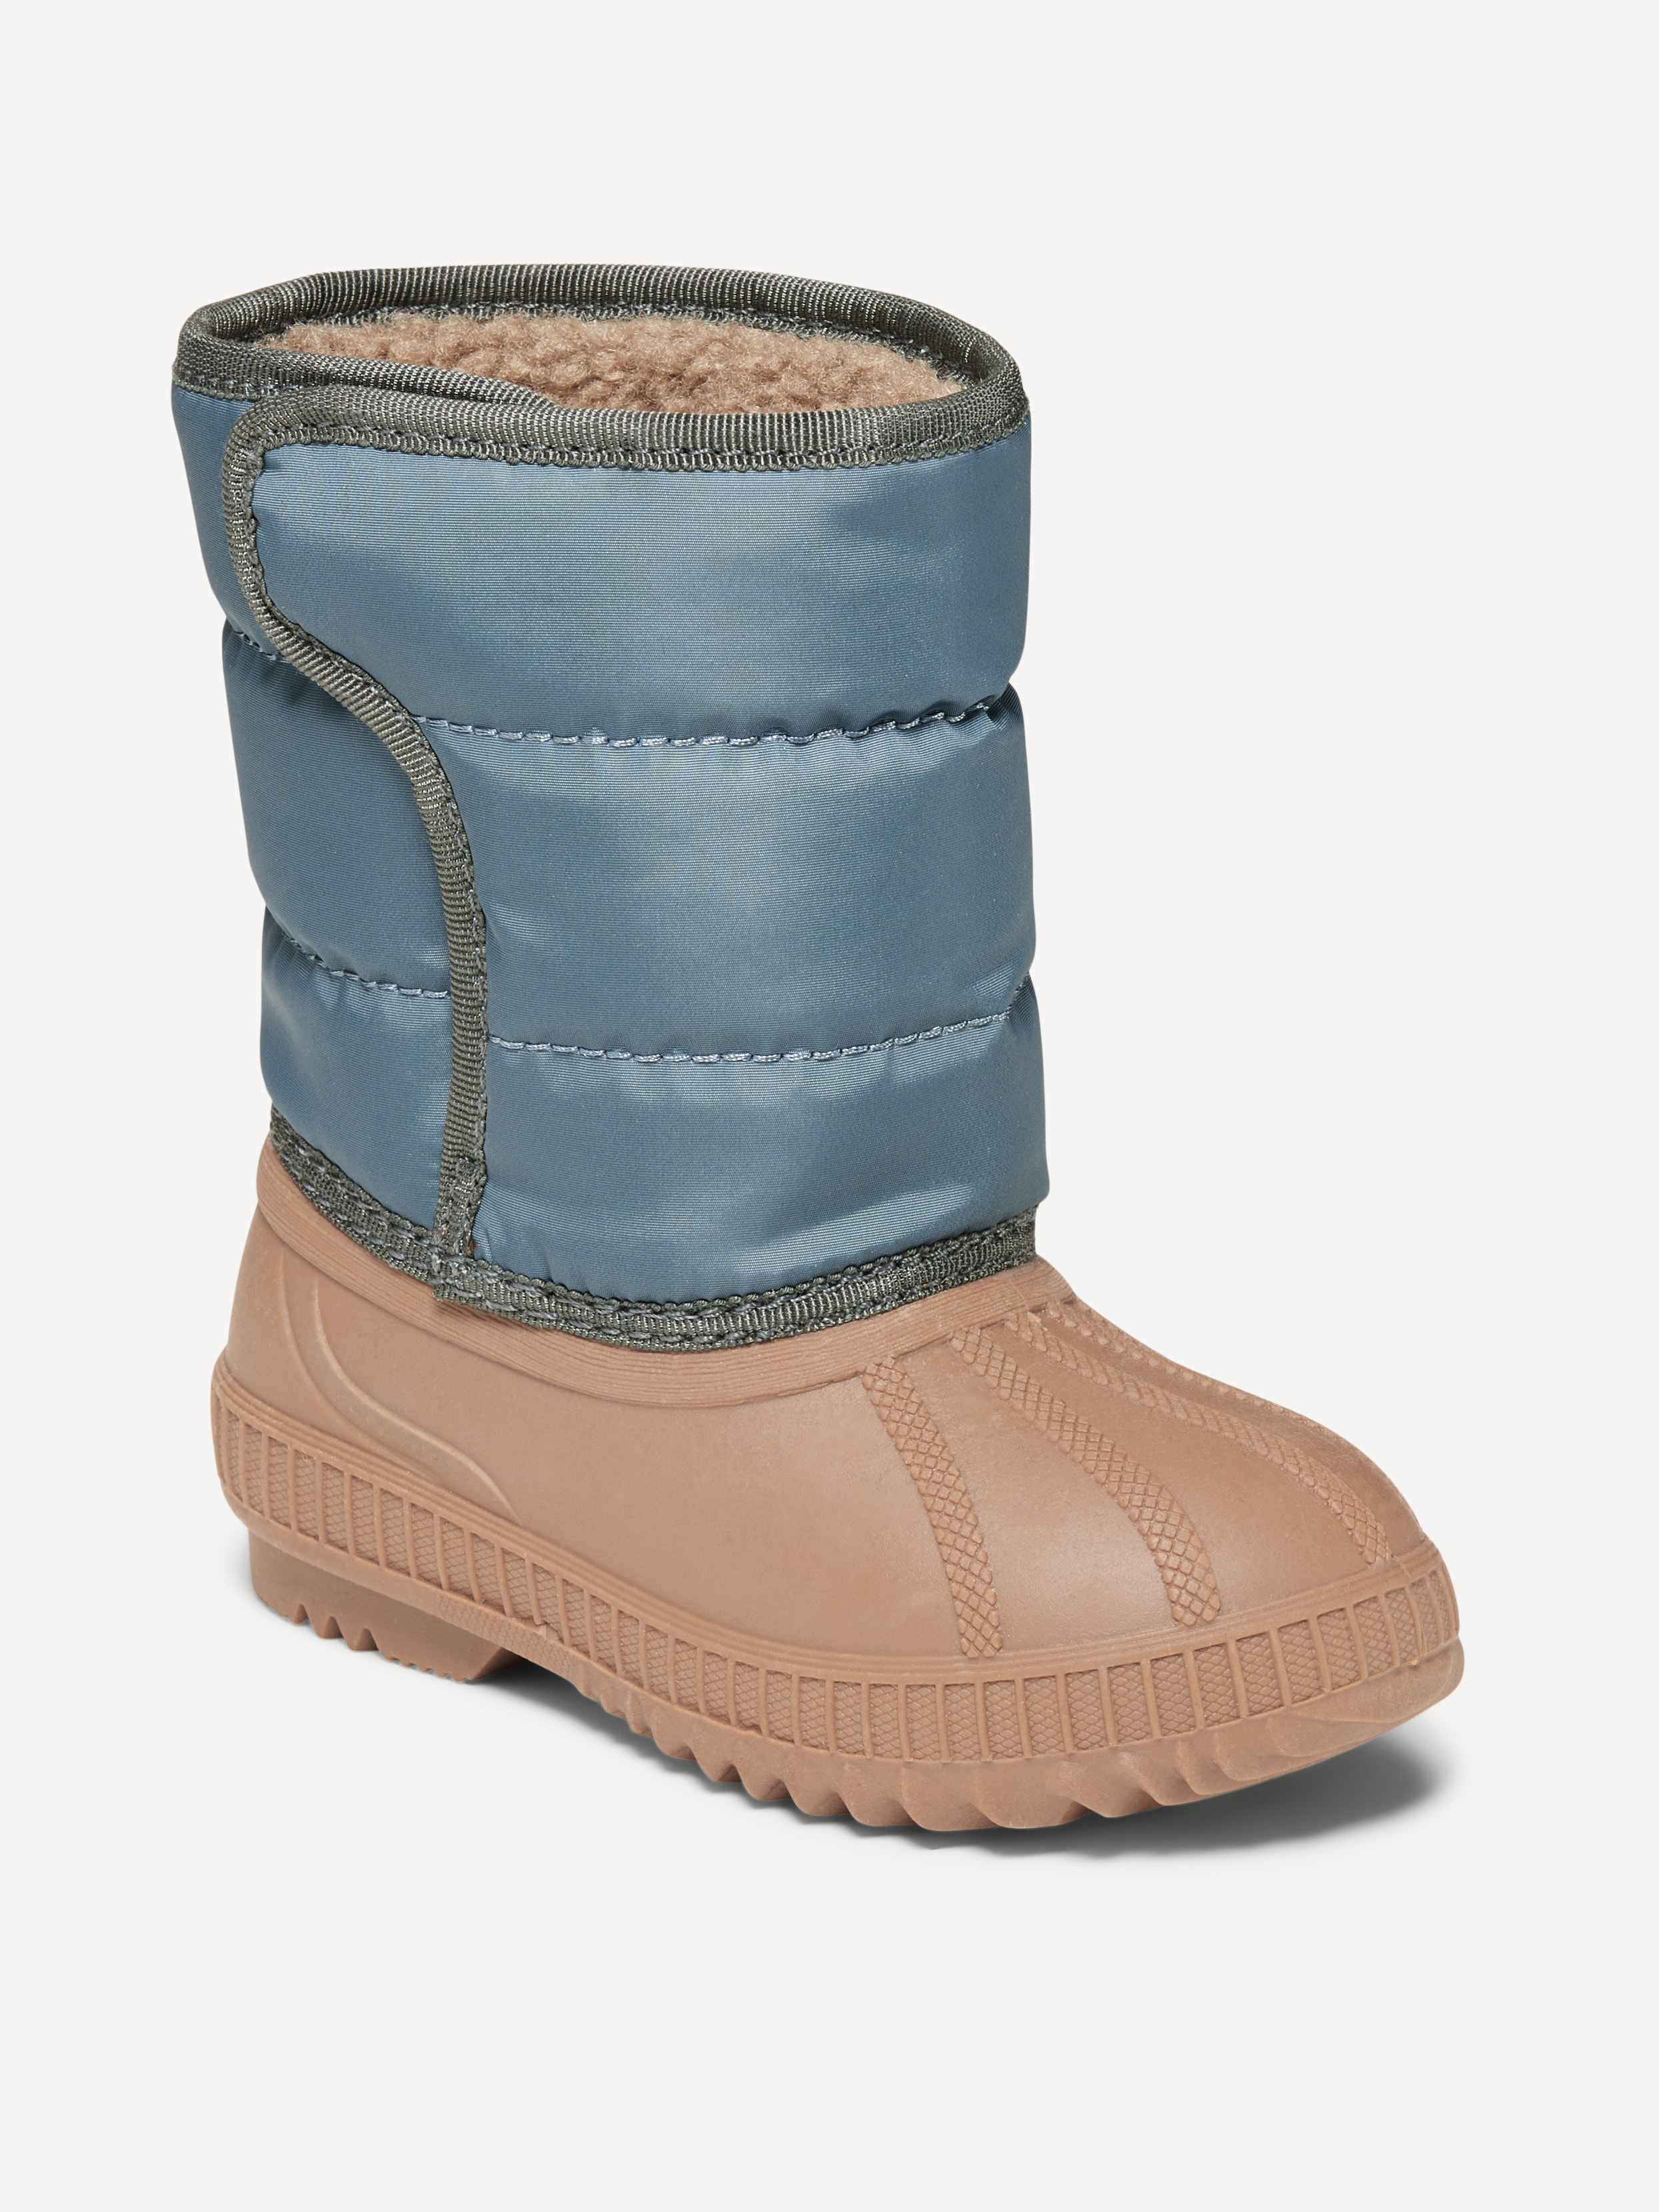 twaalf Extreem Probleem Quilted Duck Boots for Toddler Boys | Old Navy